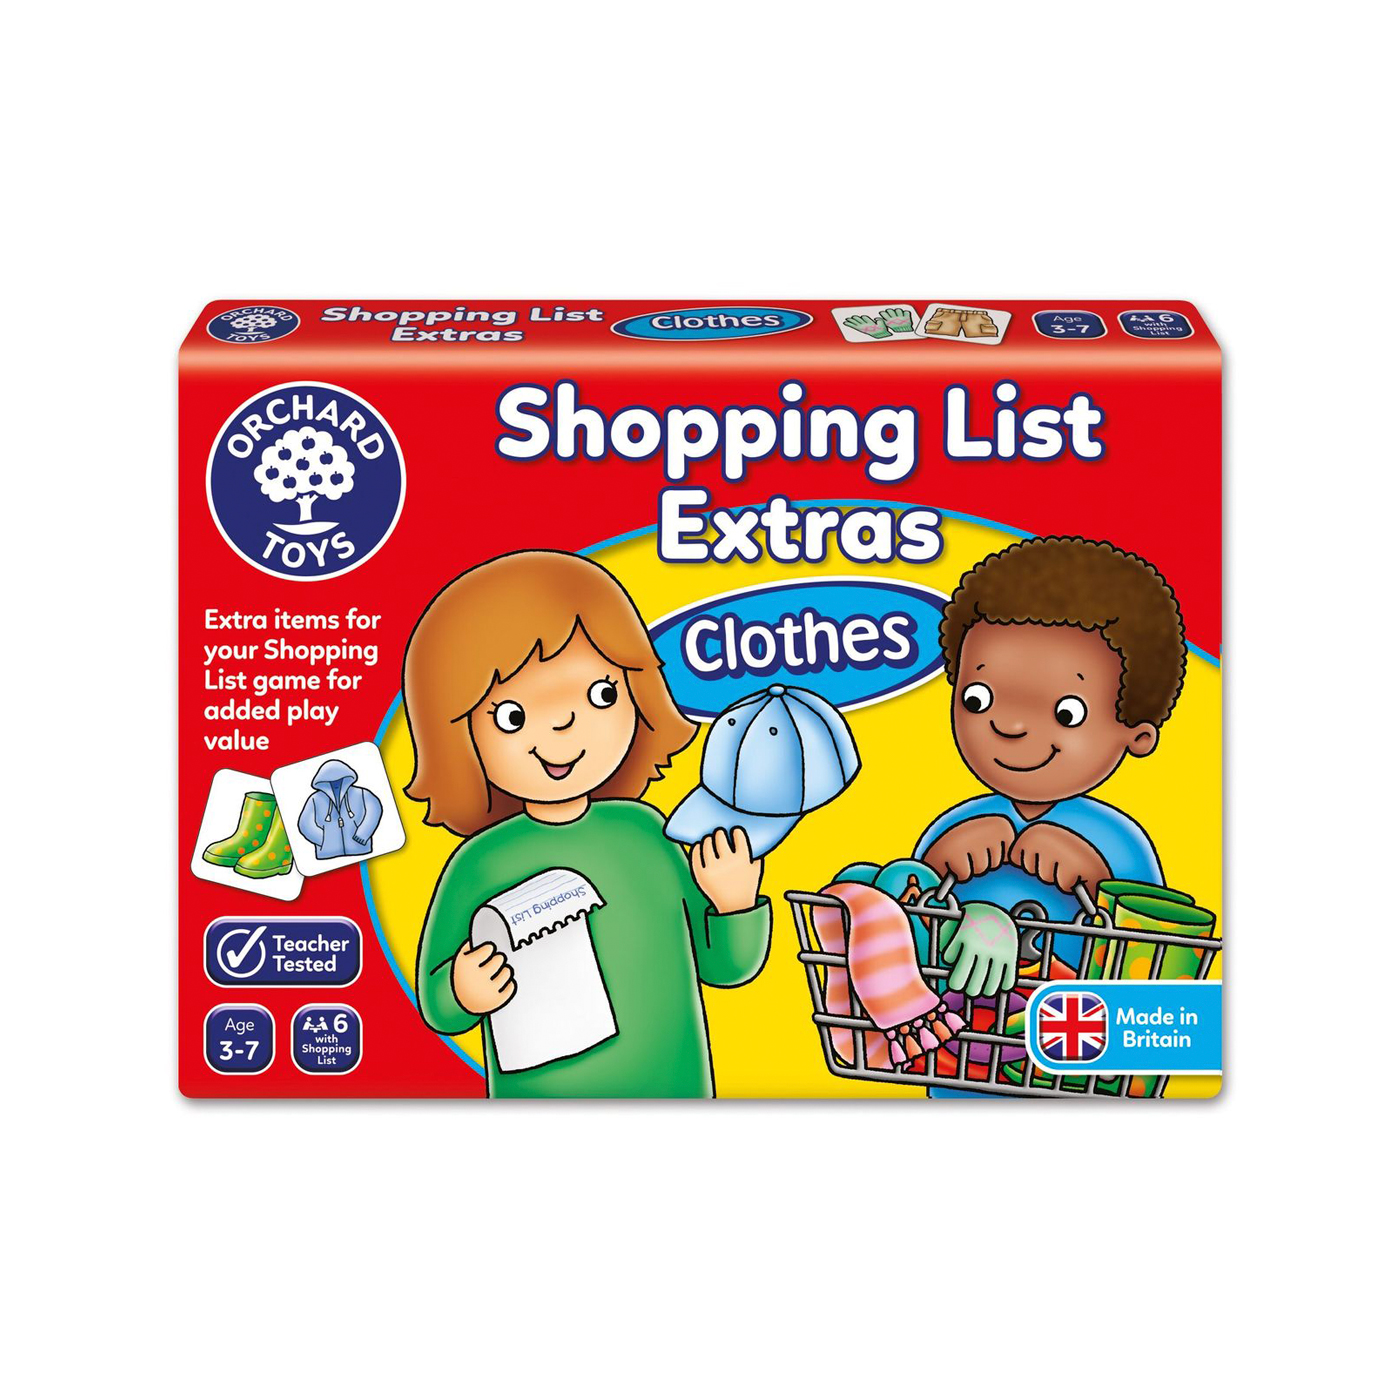 ORCHARD TOYS Orchard Toys Shopping List Clothes 3-7 Yaş